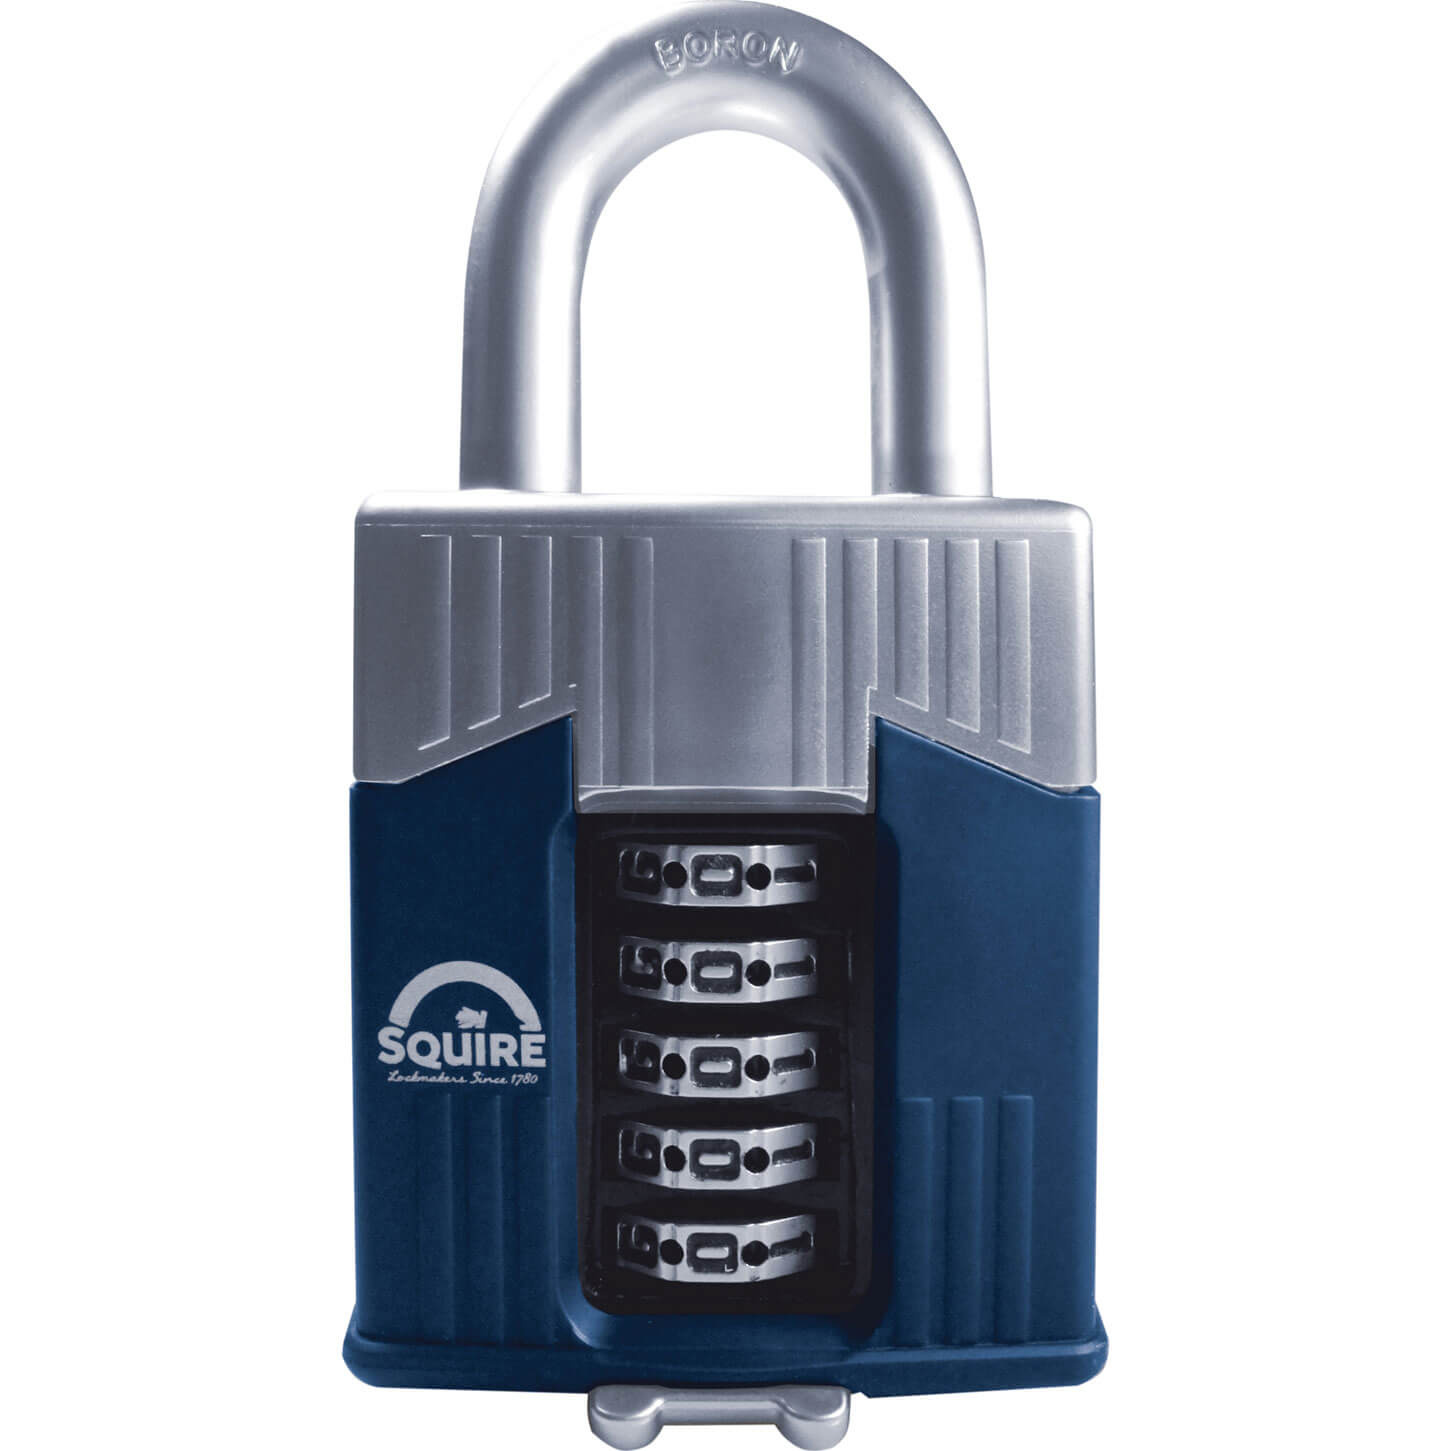 Image of Henry Squire Warrior High-Security Shackle Combination Padlock 65mm Standard